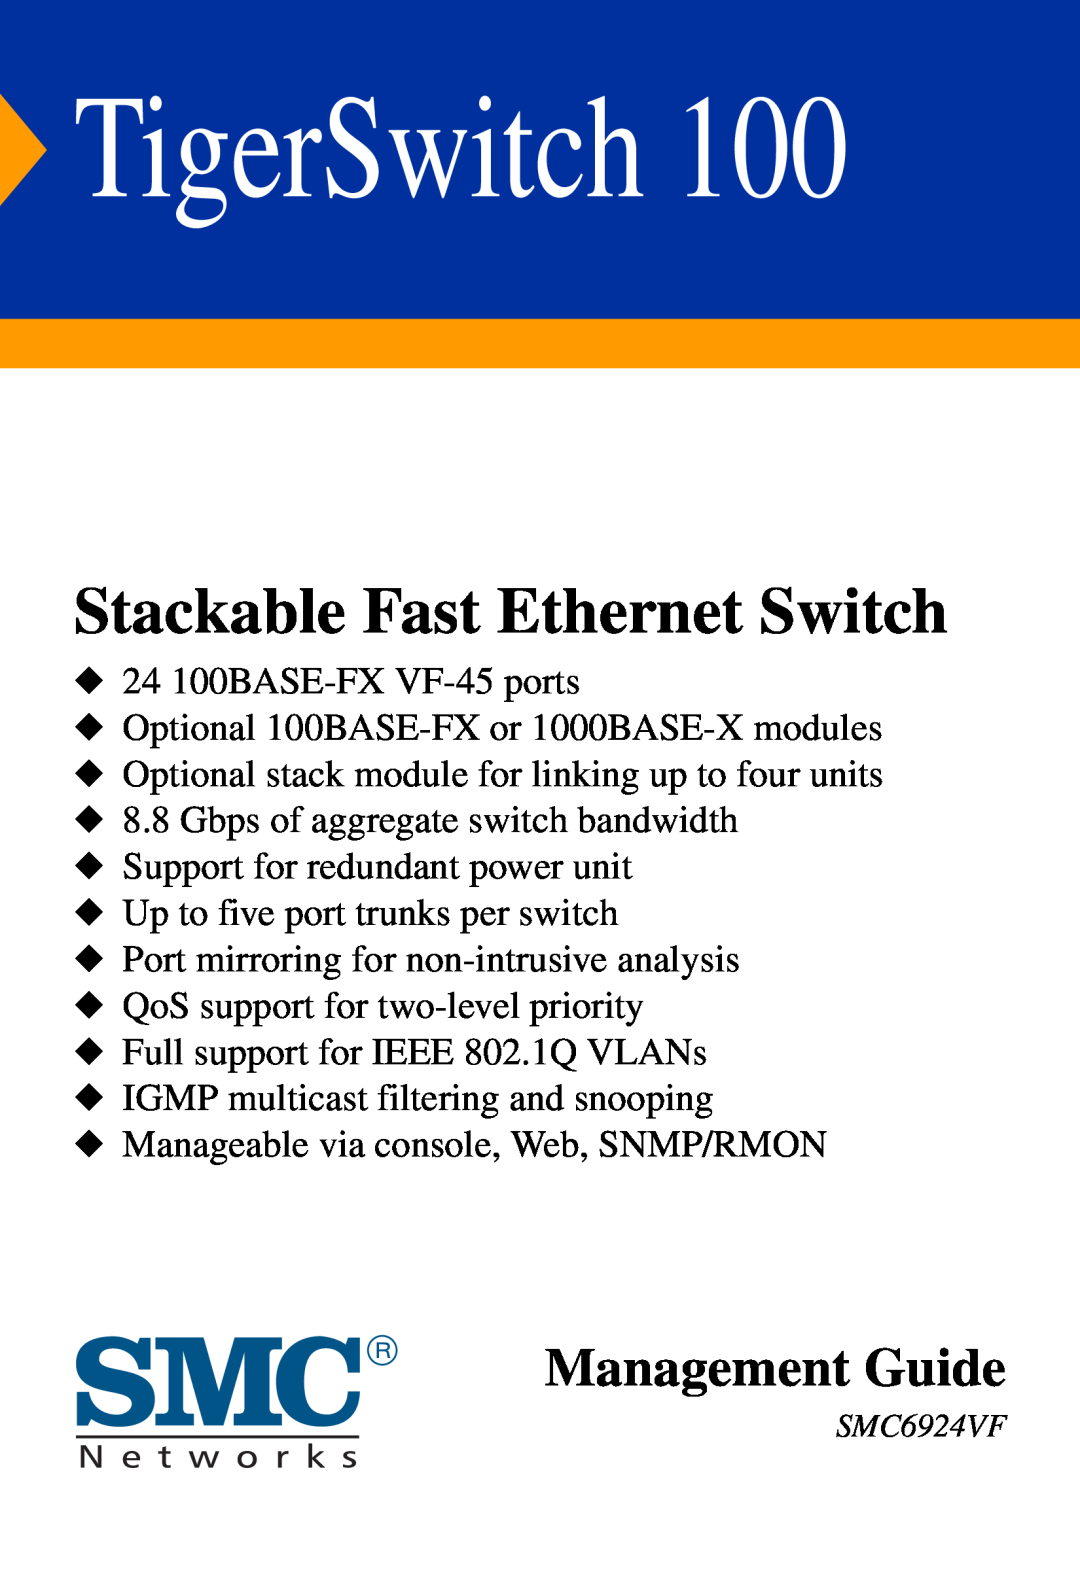 SMC Networks SMC6924VF manual Stackable Fast Ethernet Switch, TigerSwitch, Management Guide 